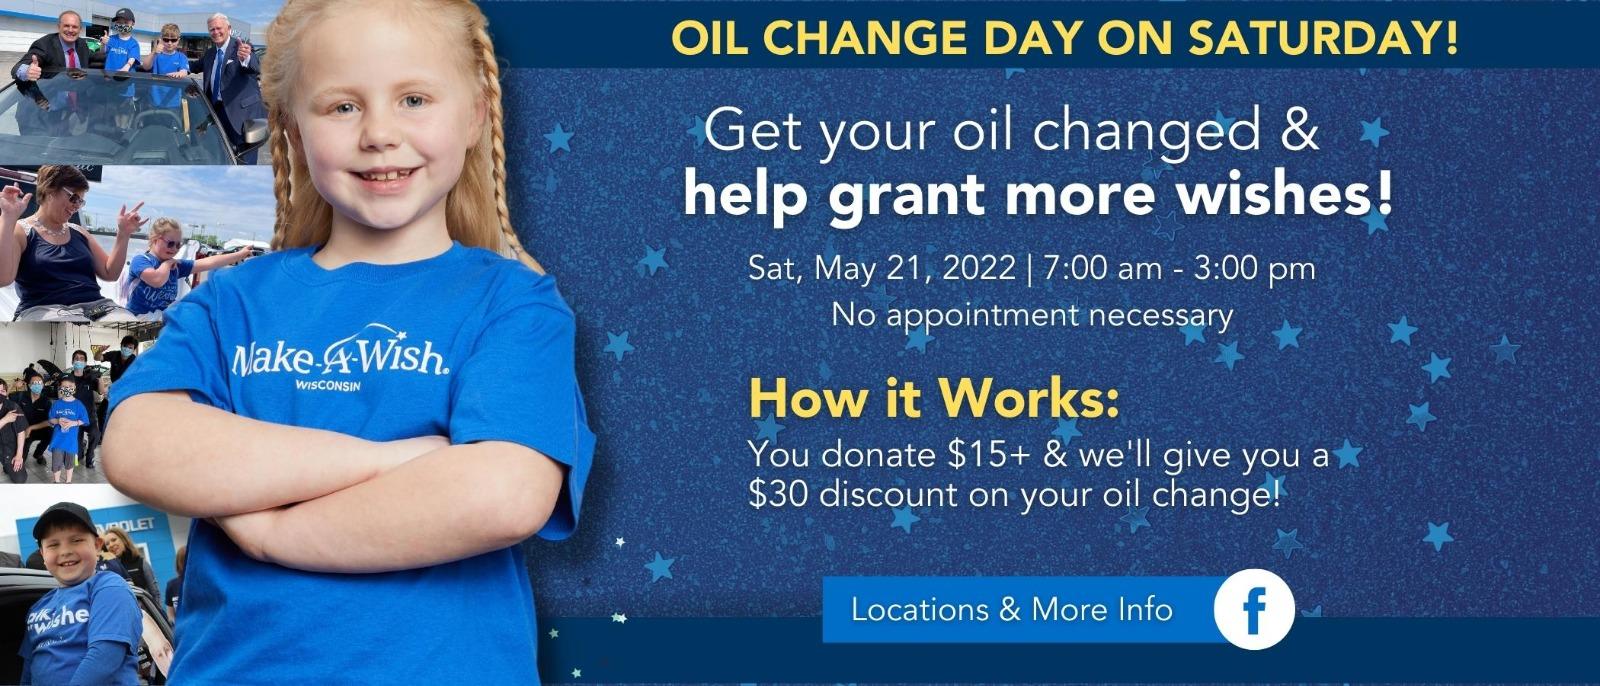 Oil Change Day Saturday May 21st